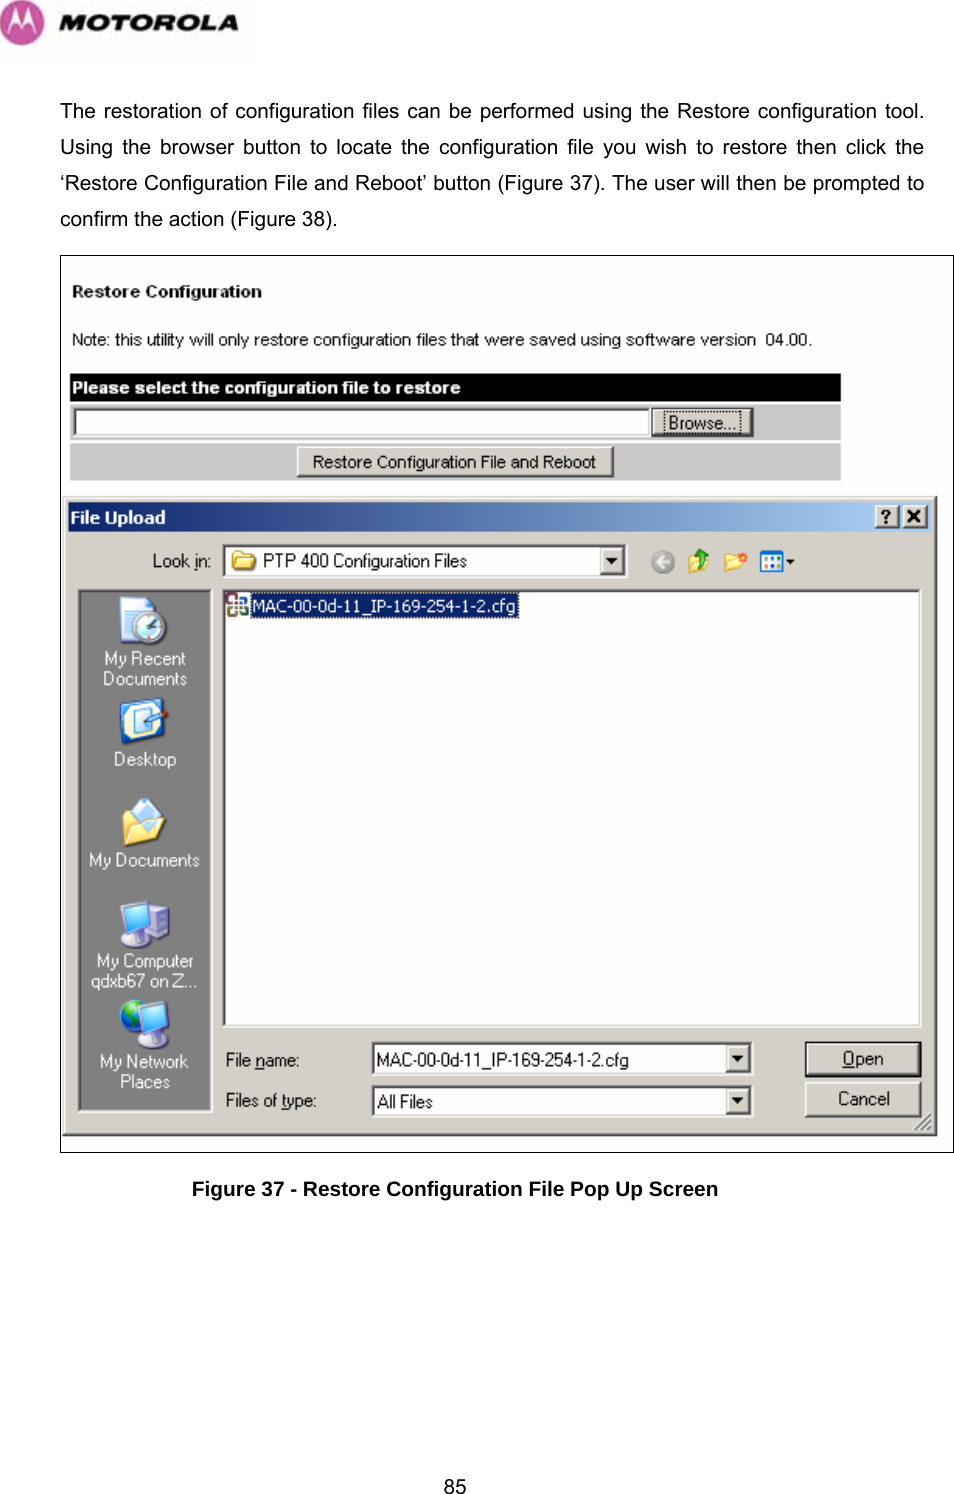   85The restoration of configuration files can be performed using the Restore configuration tool. Using the browser button to locate the configuration file you wish to restore then click the ‘Restore Configuration File and Reboot’ button (Figure 37). The user will then be prompted to confirm the action (Figure 38).  Figure 37 - Restore Configuration File Pop Up Screen 